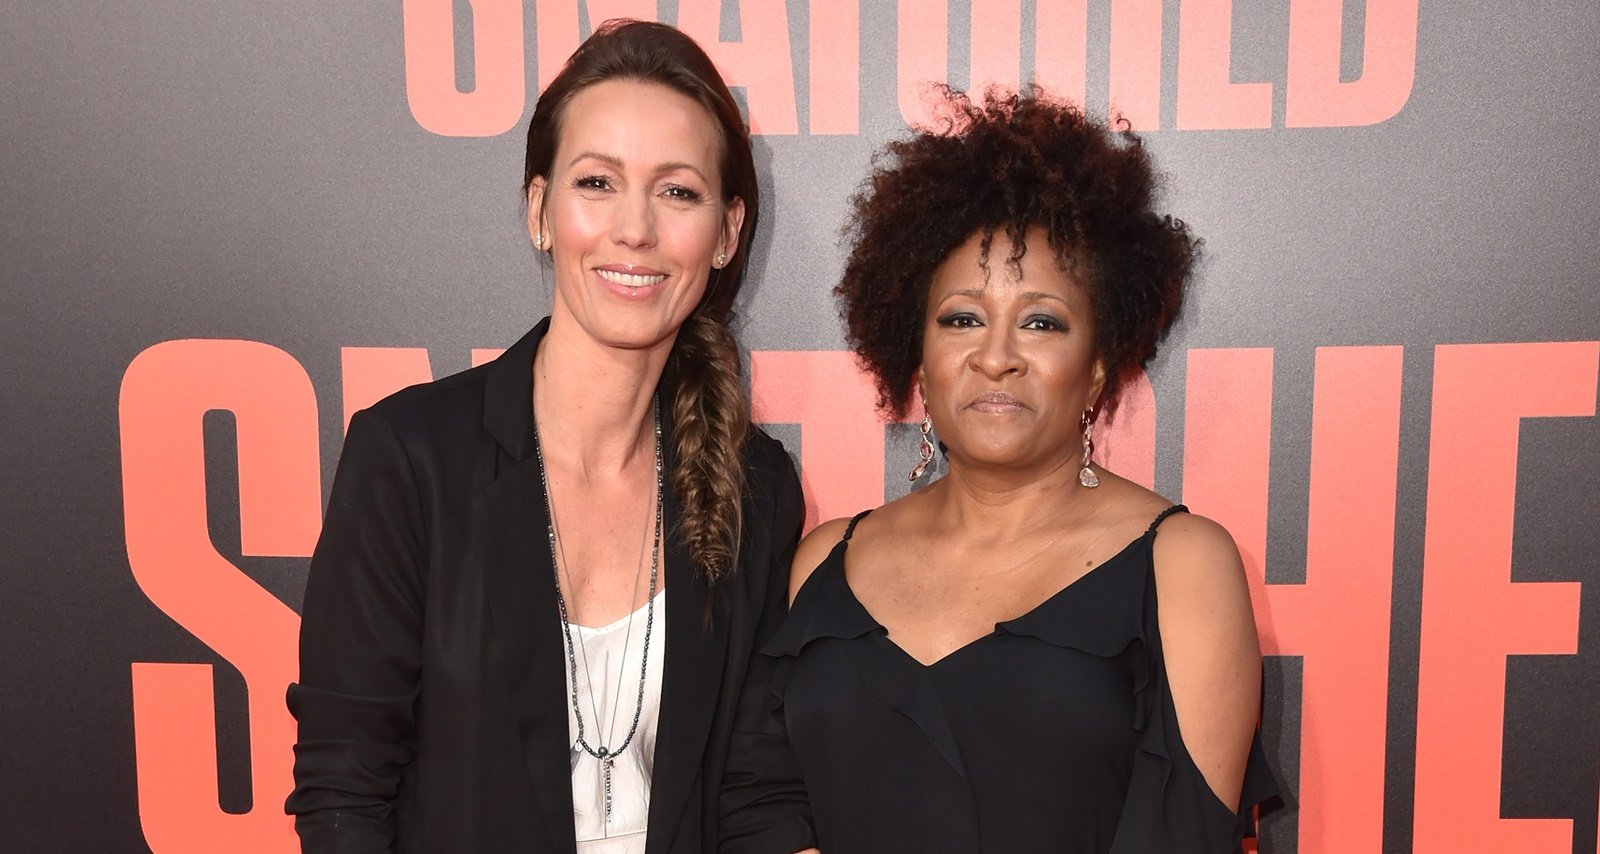 Alex Sykes Wiki: Facts to Know about Wanda Sykes’ Wife